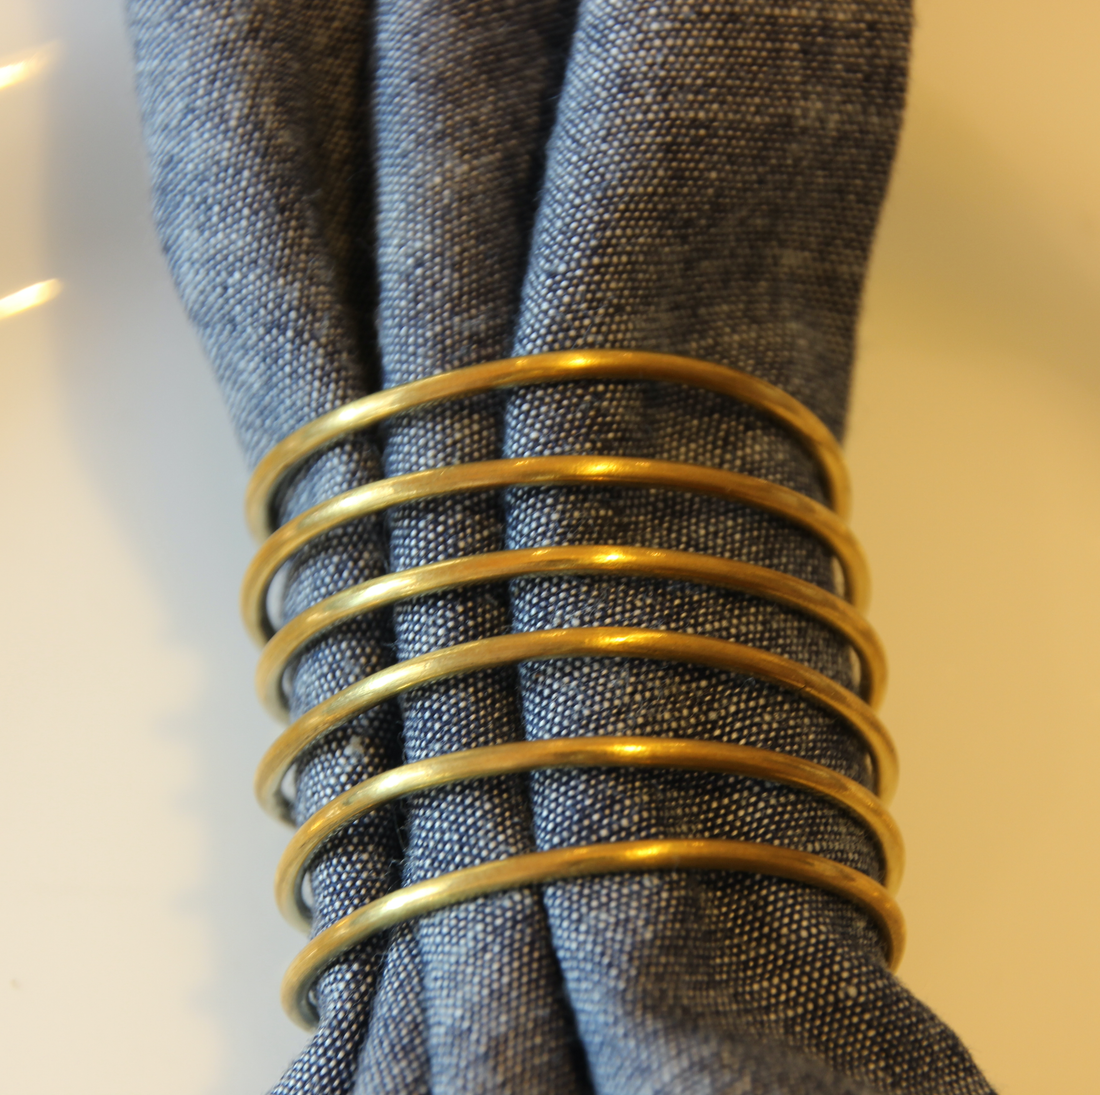 Table and Kitchen fair trade ethical sustainable fashion Brass Coil Napkin Rings- Set of Four conscious purchase Basha